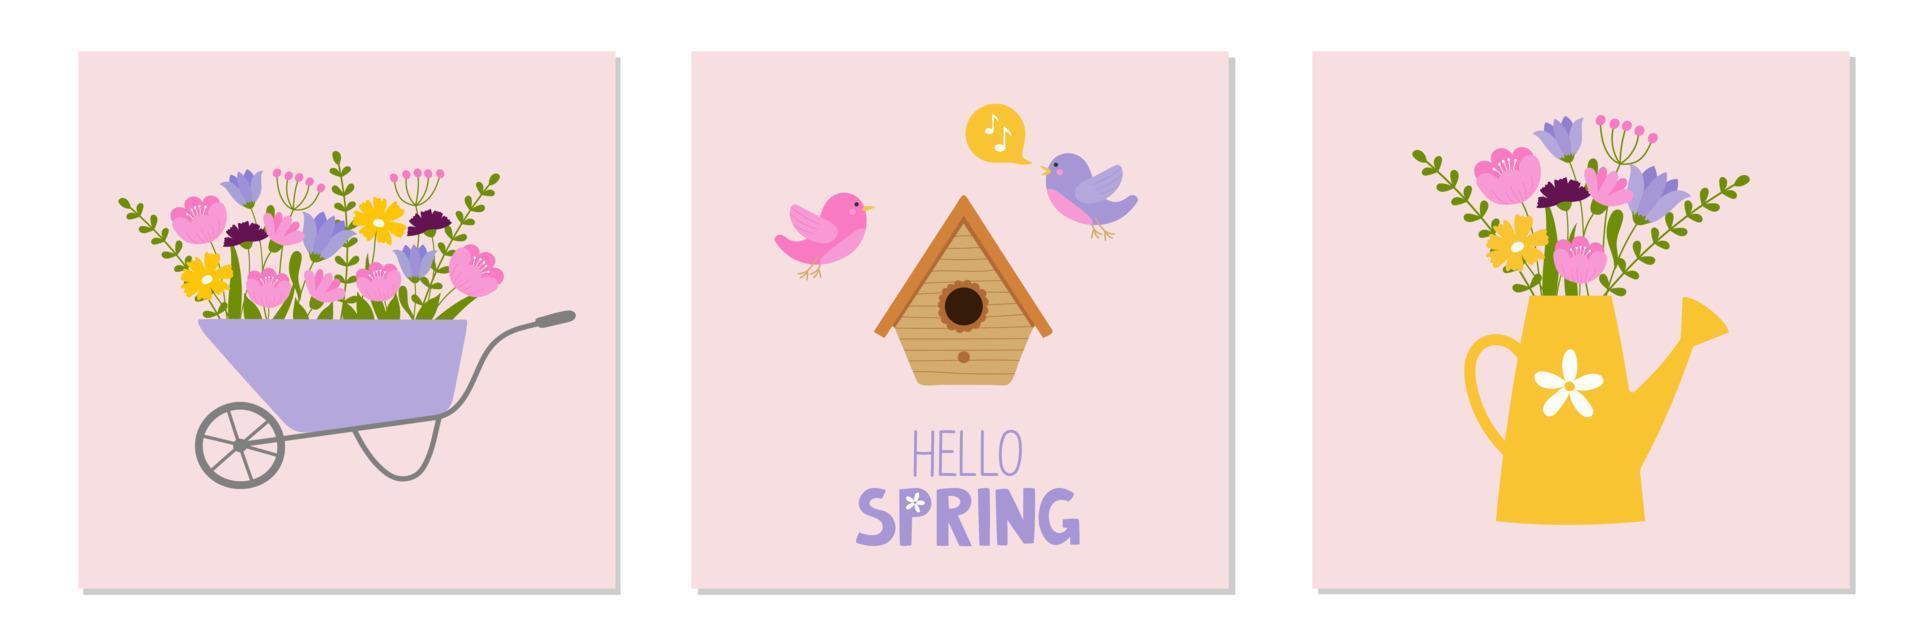 Set of spring mood posters template. Welcome spring season greeting card. Minimalist postcards with cute cartoon elements and lettering. Doodle flat style vector